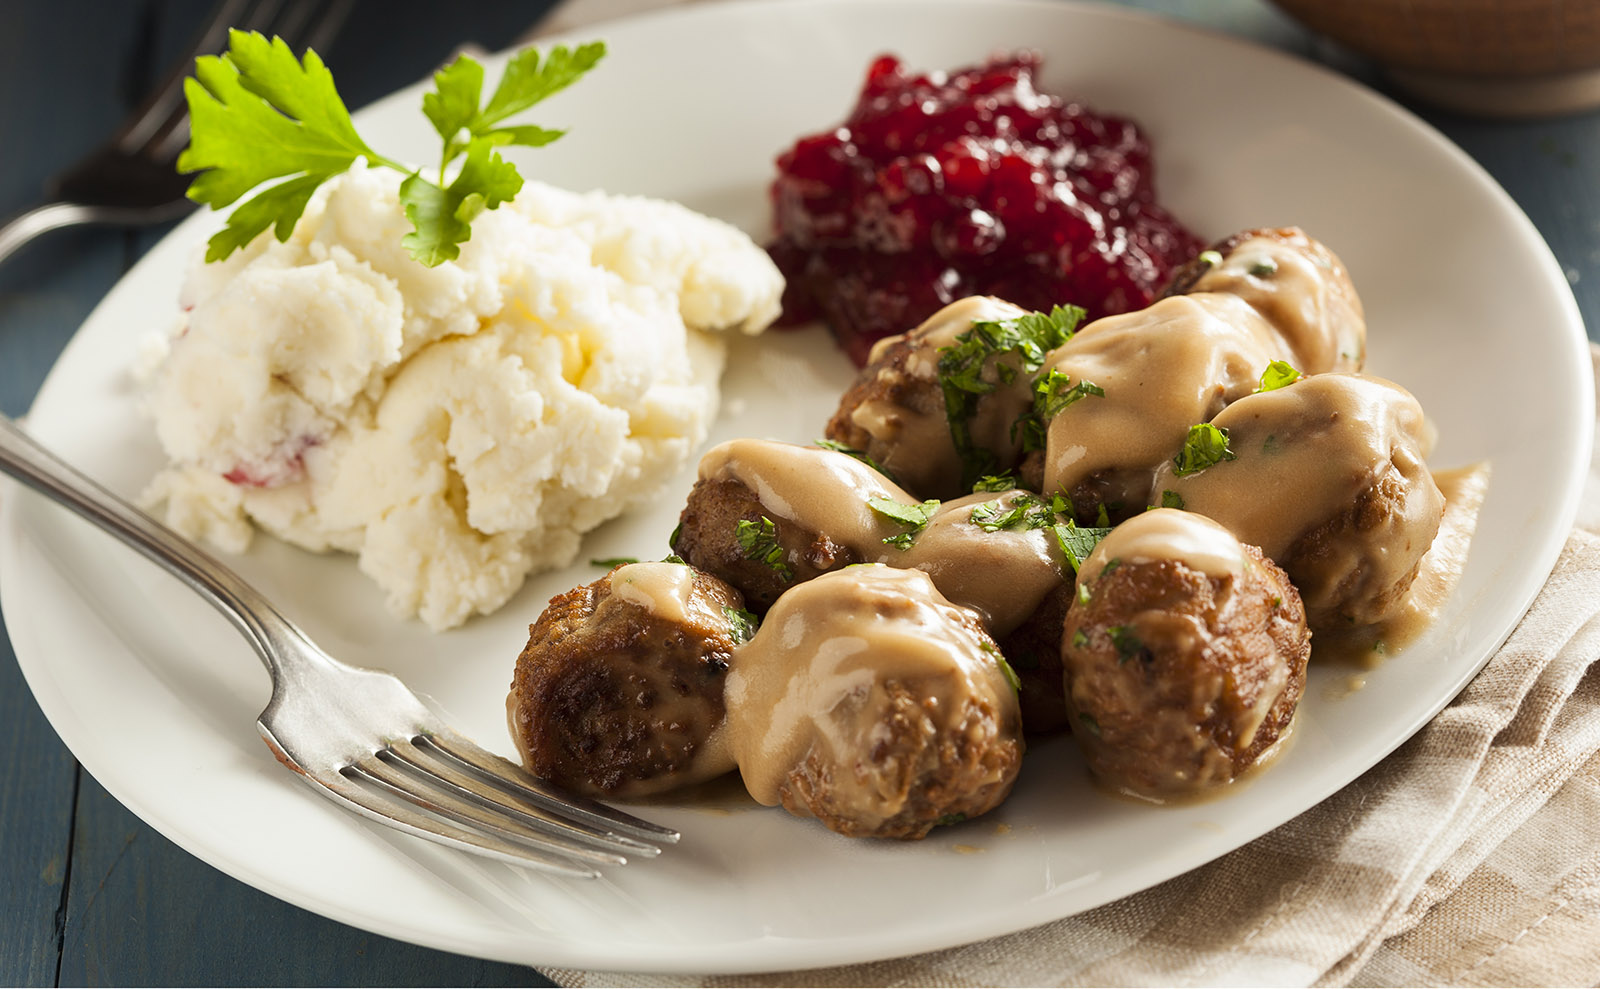 swedish meatballs in gravy with mashed potatoes and lingonberry jam